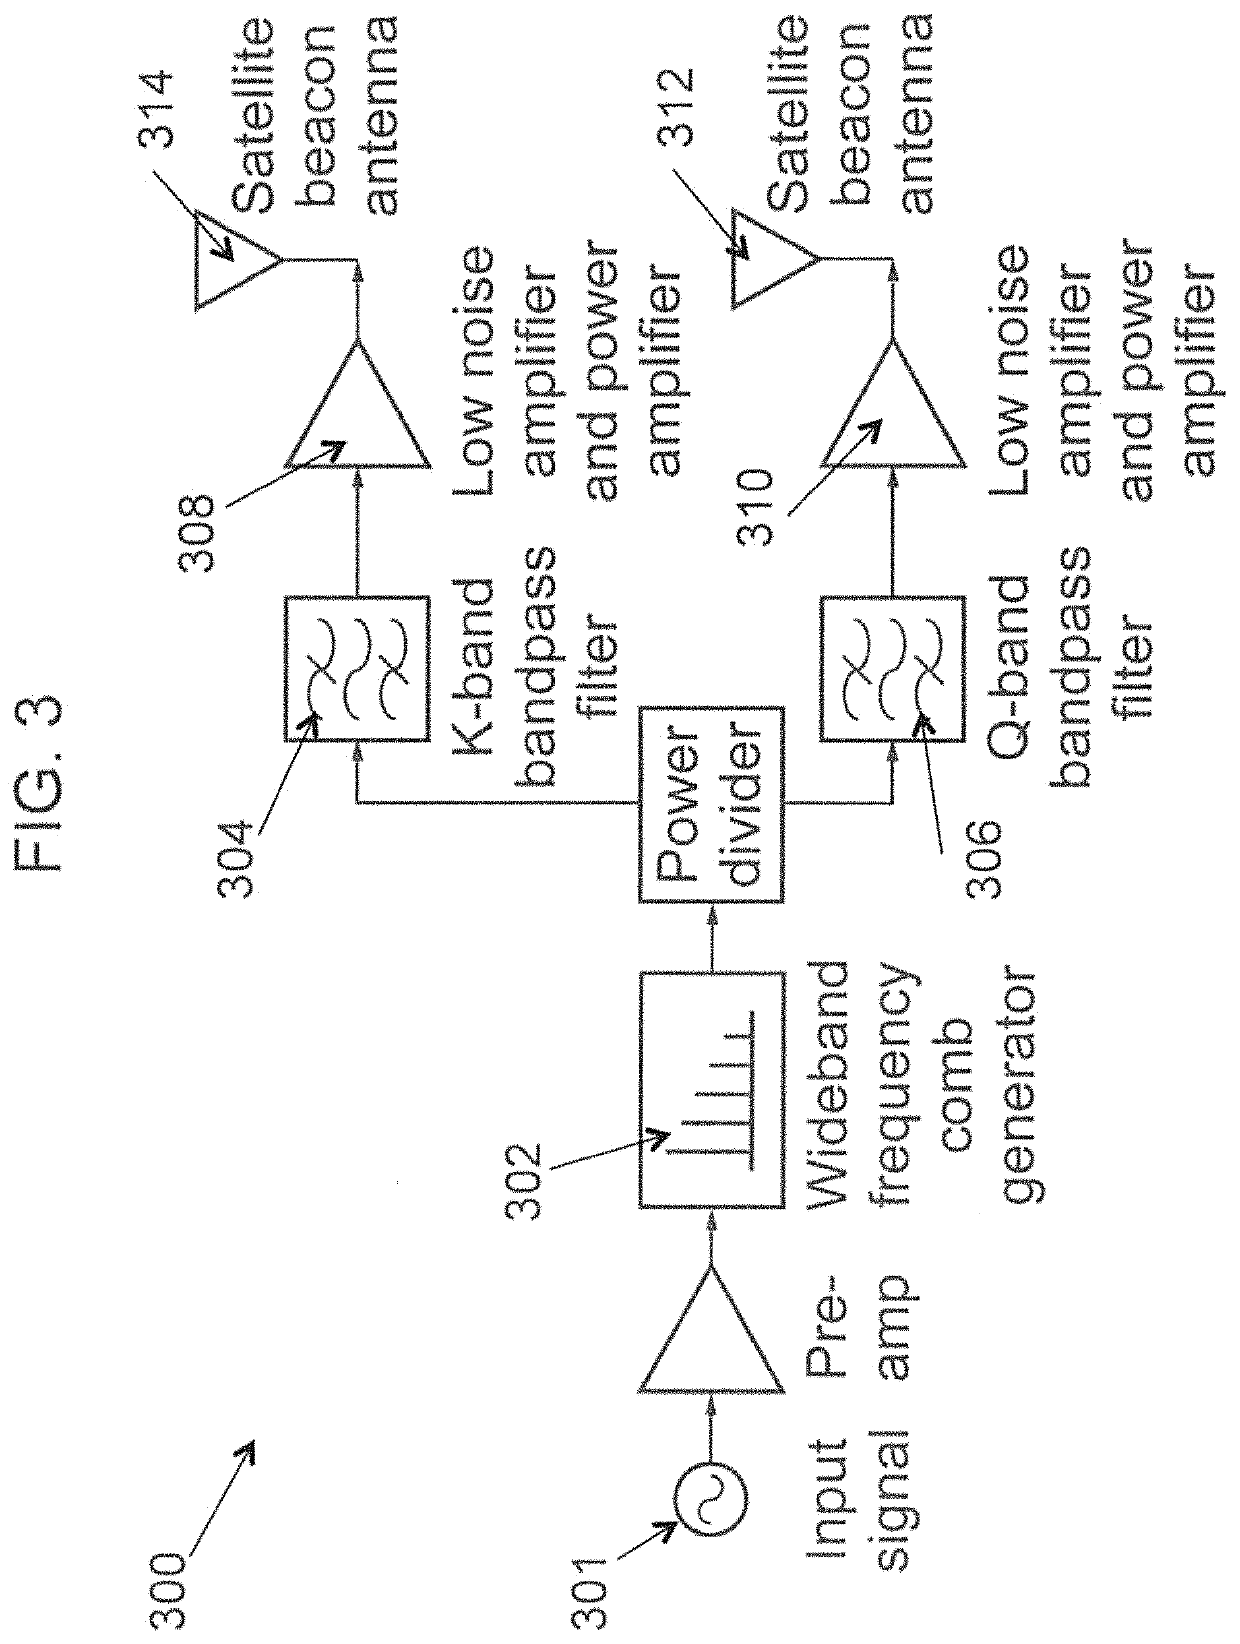 Tunable multi-tone multi-band high-frequency synthesizer for space-borne beacon transmitter for atmospheric radio wave propagation studies